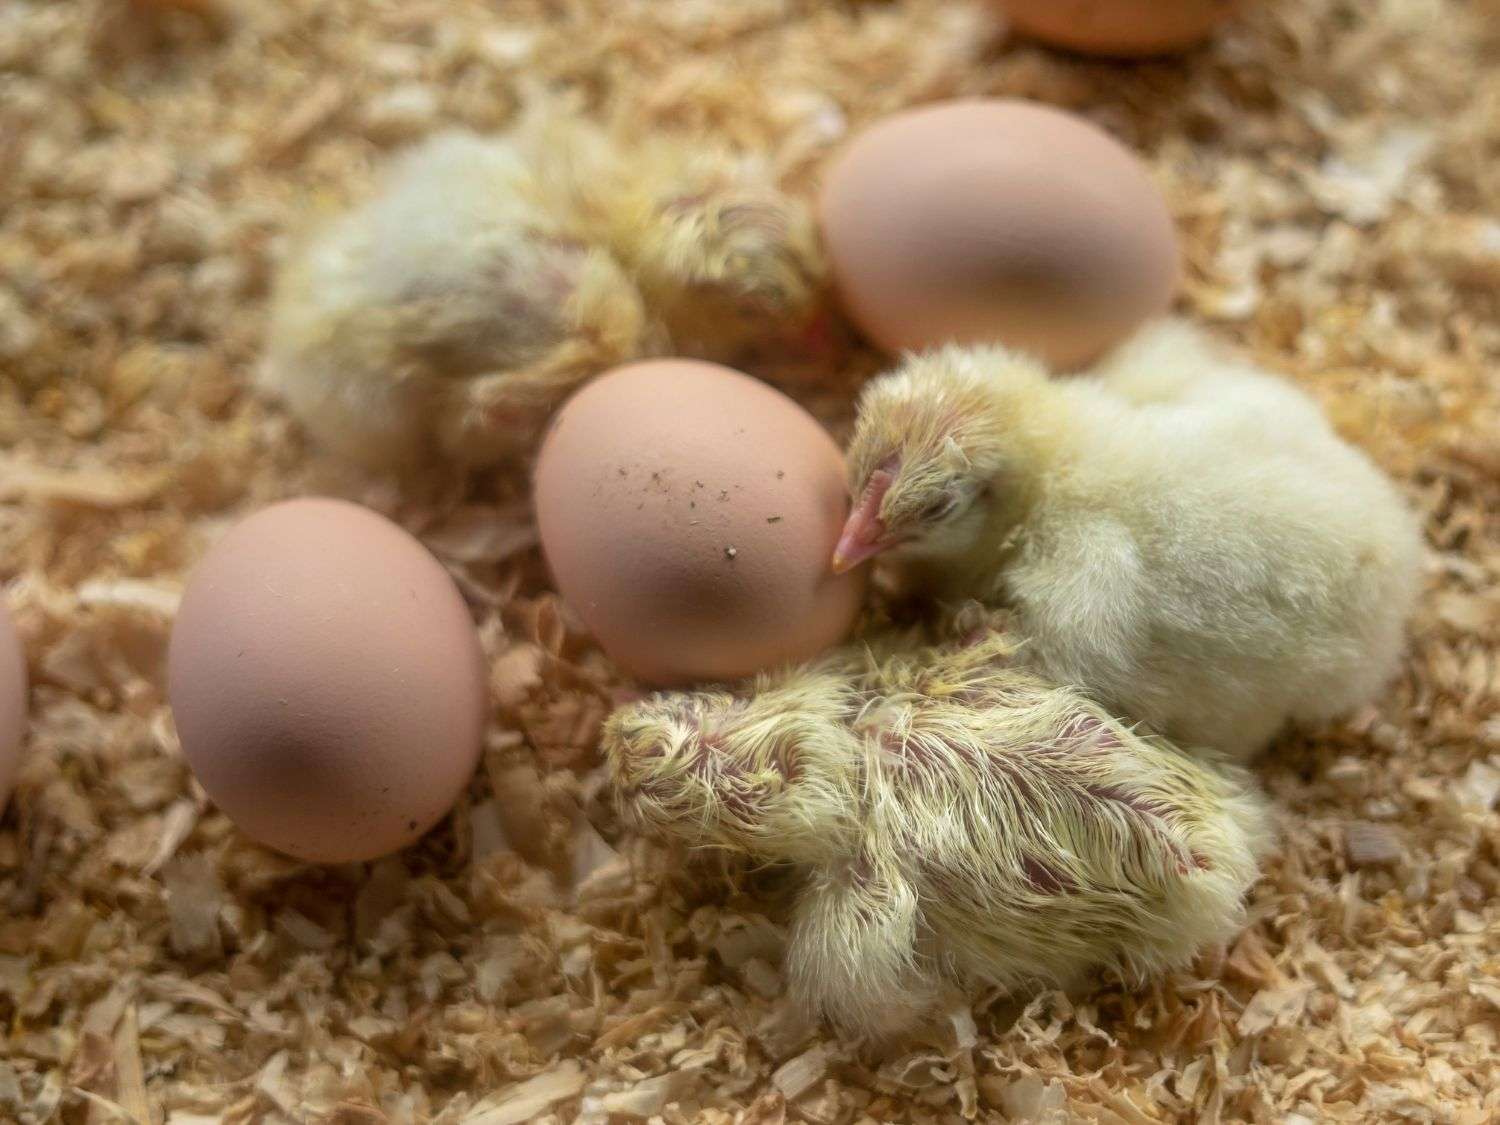 Freshly hatched chicks sitting next to 3 eggs